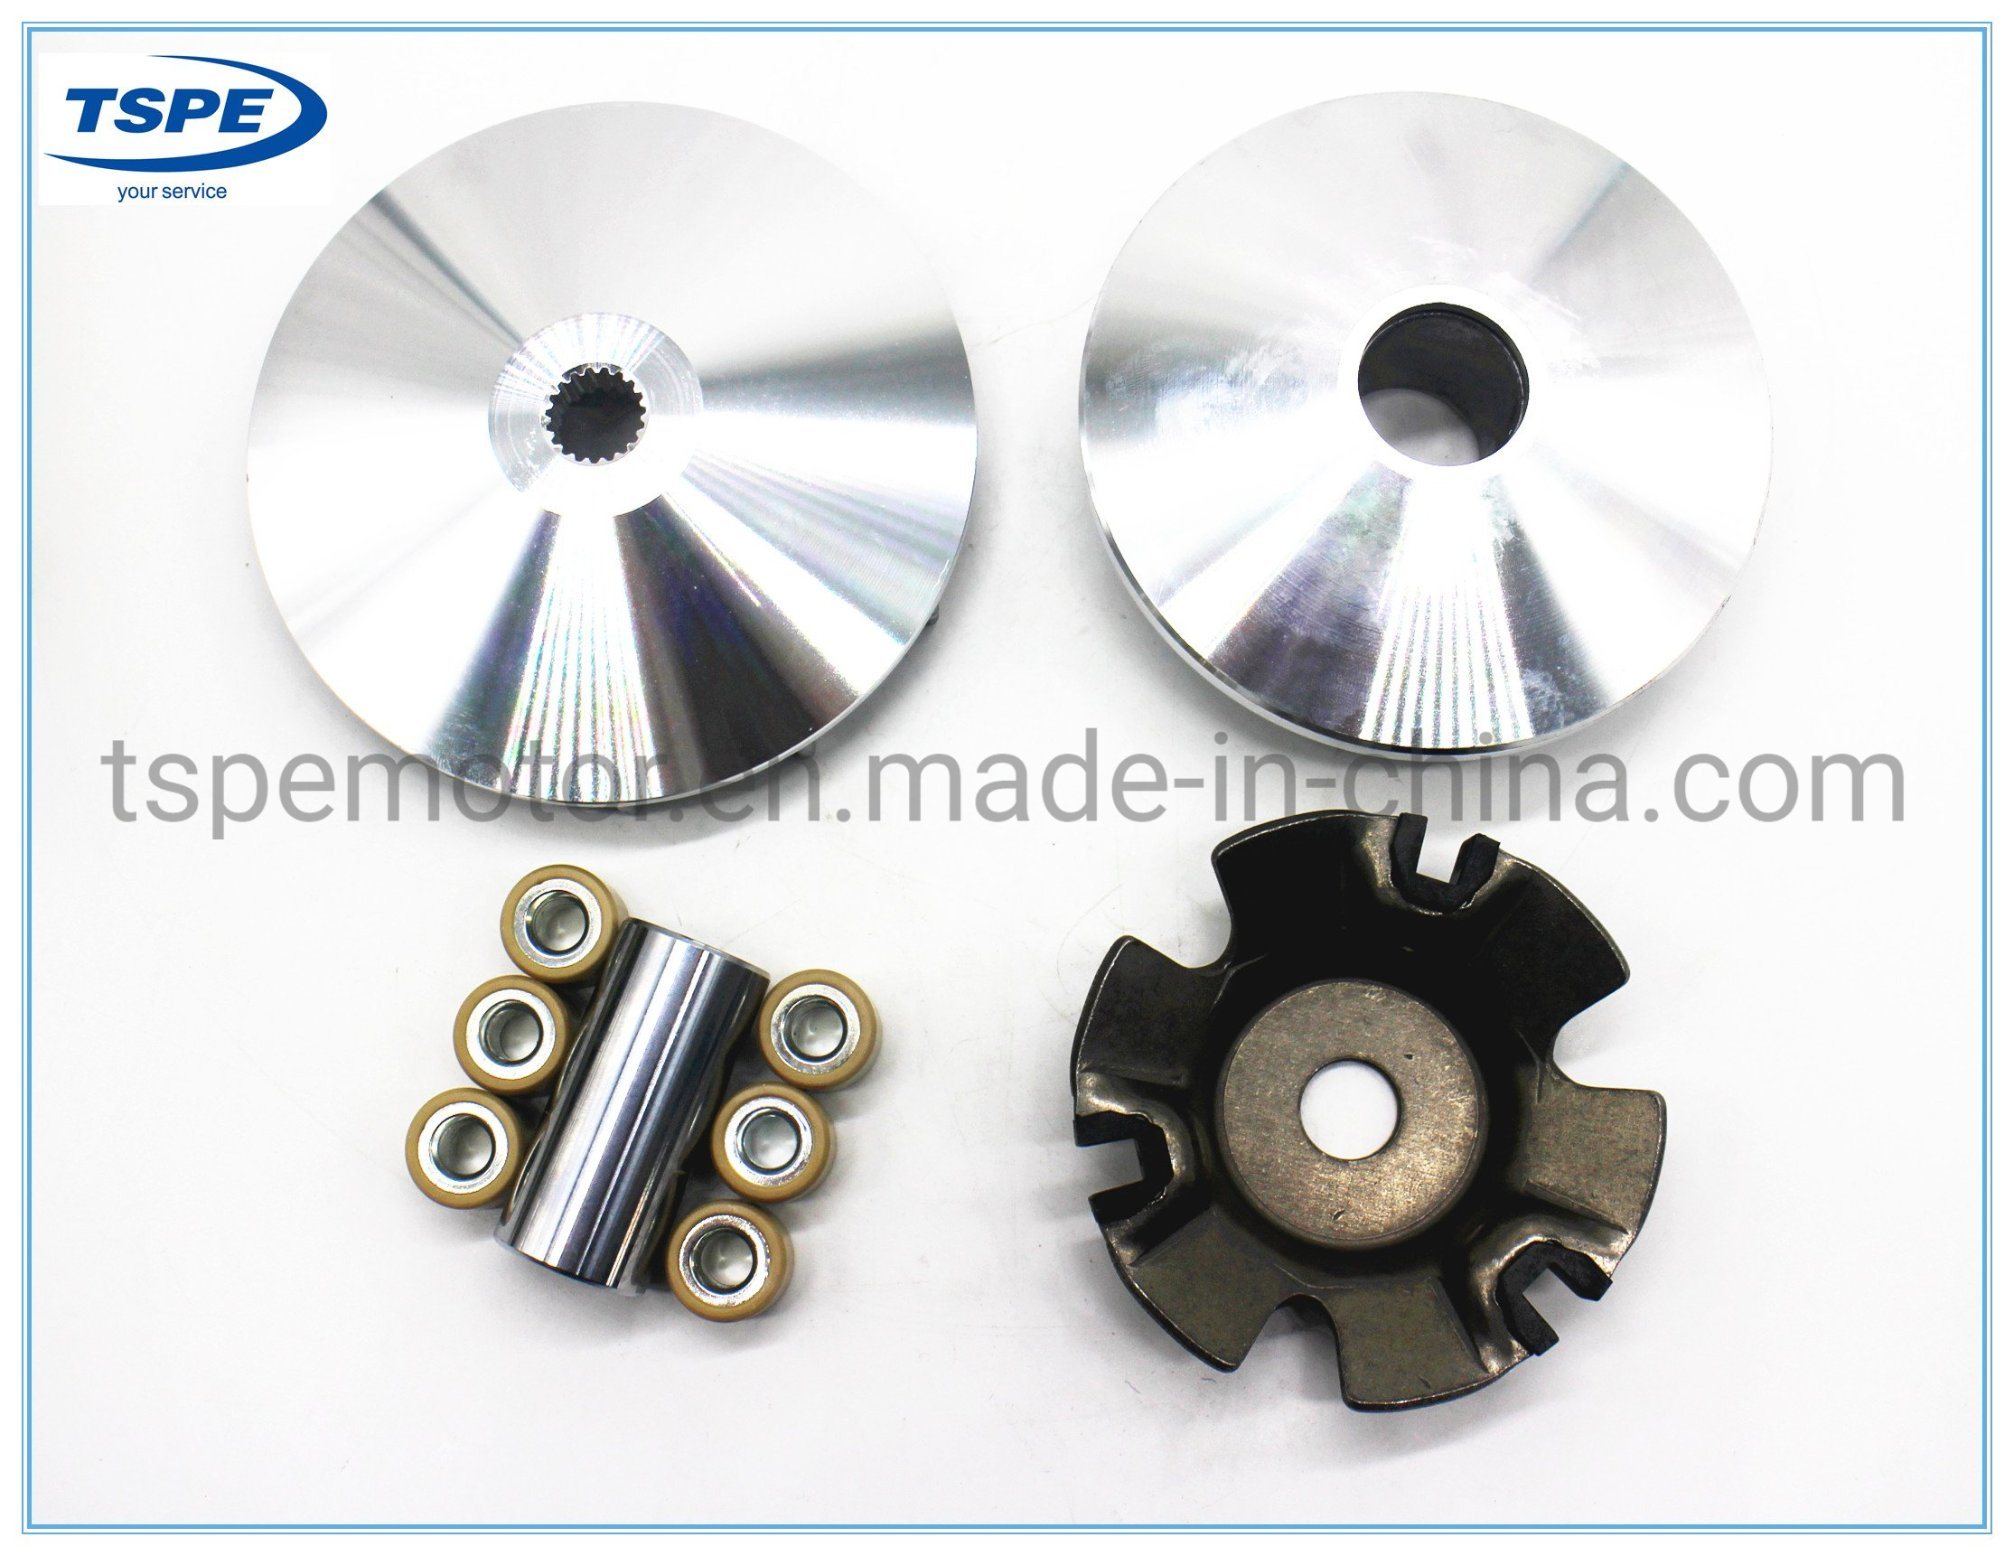 Motorcycle Pulley Driving Wheel Assy Motorcycle Parts for CS125